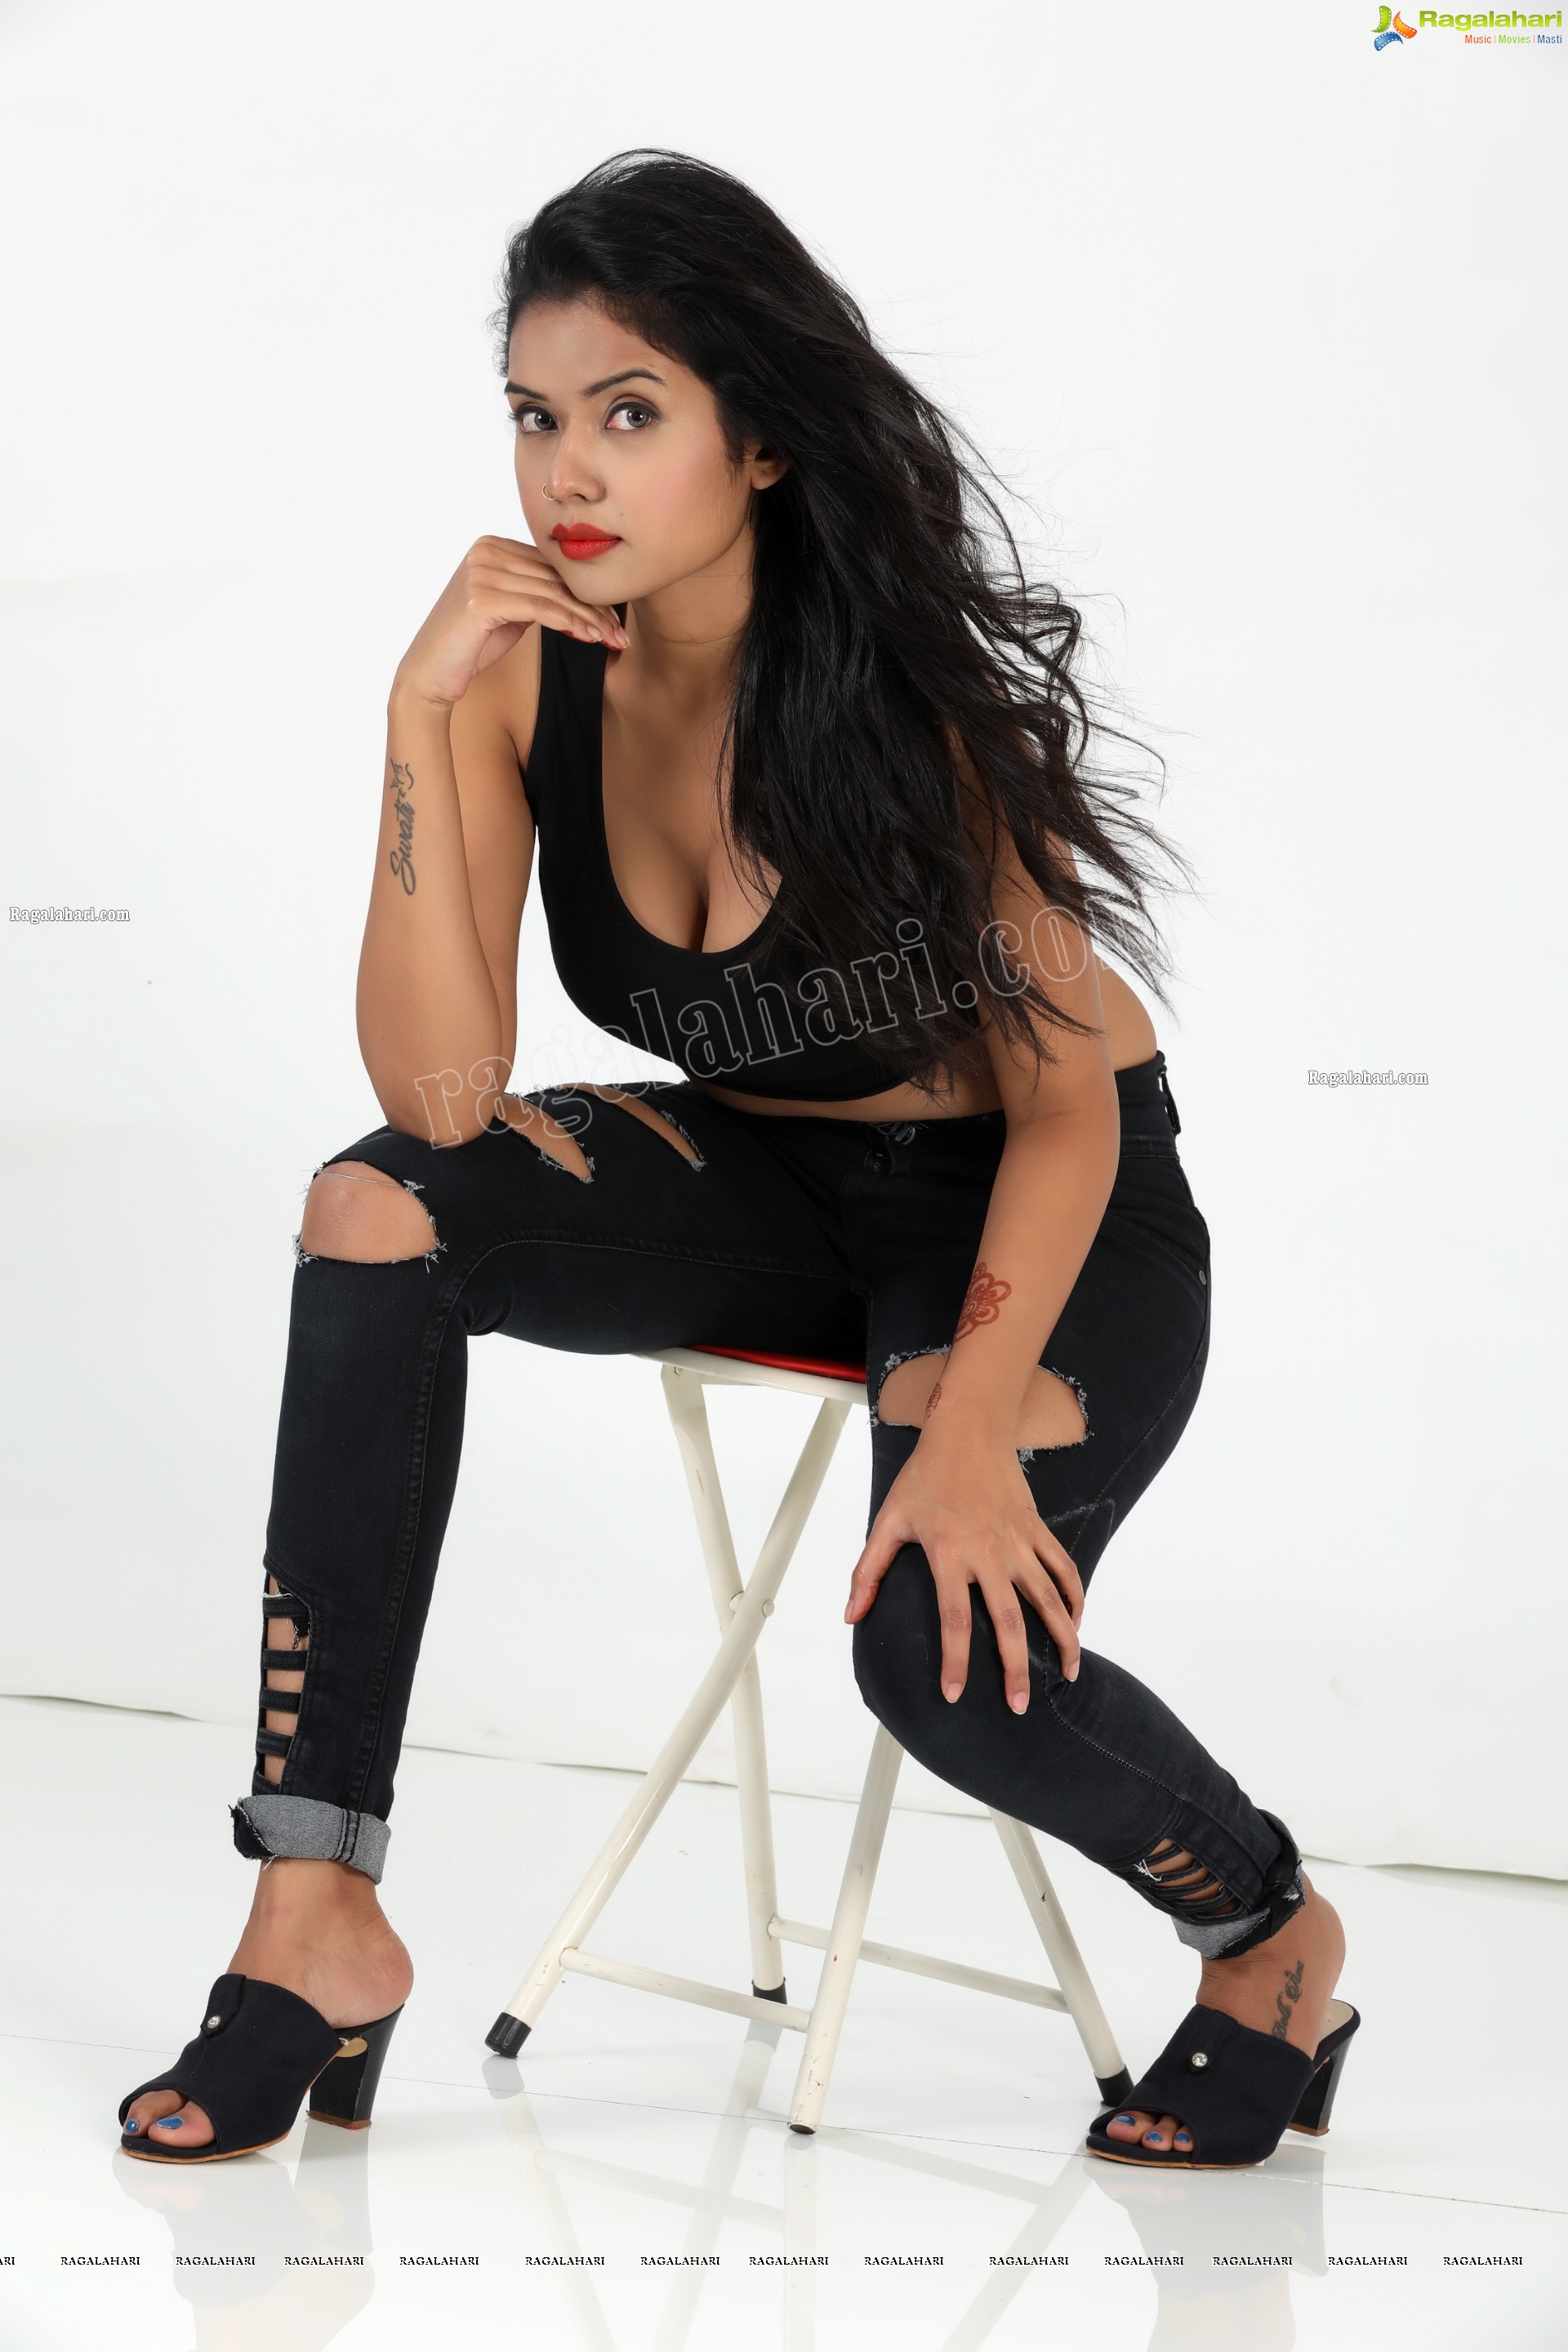 Swati Mandal in Black Crop Top and Ripped Jeans Exclusive Photo Shoot